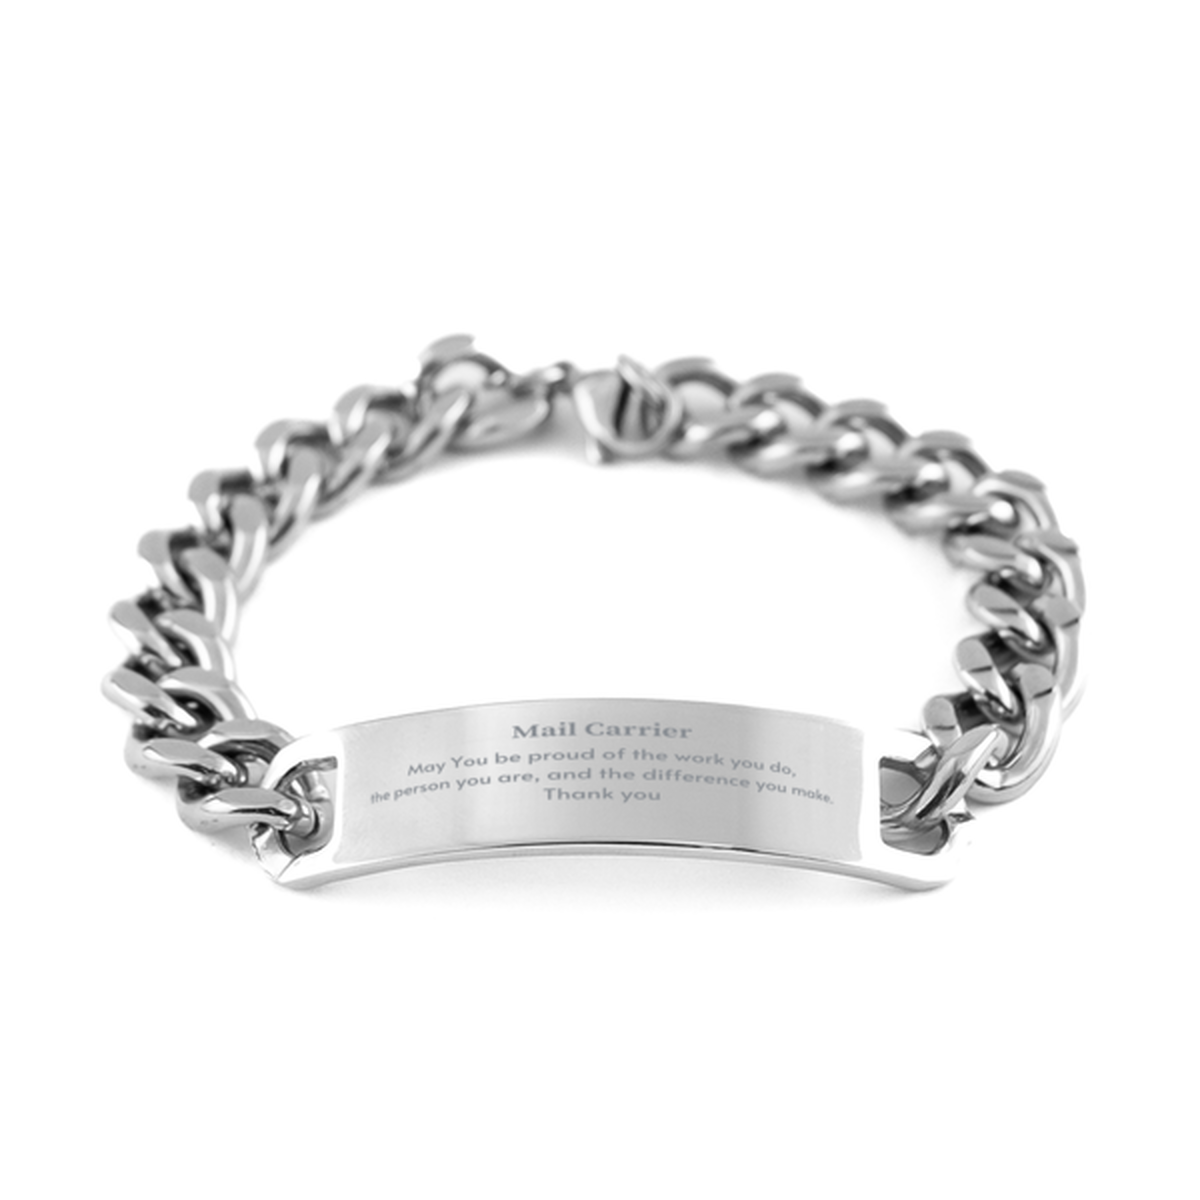 Heartwarming Cuban Chain Stainless Steel Bracelet Retirement Coworkers Gifts for Mail Carrier, Mail Carrier May You be proud of the work you do, the person you are Gifts for Boss Men Women Friends